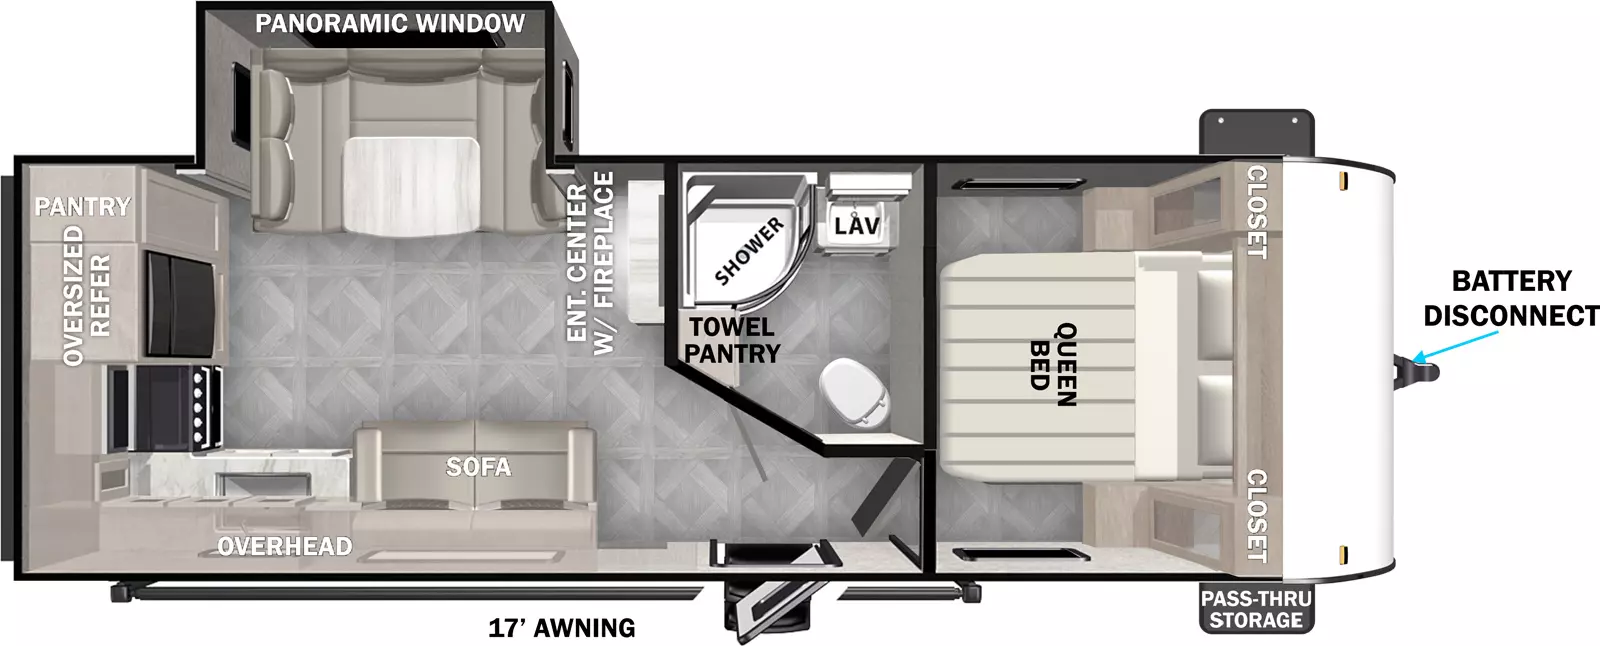 The 253RKXL has one entry and one slideout. Exterior features front pass-through storage, battery disconnect, and 17 foot awning. Interior layout front to back: queen bed with closets on each side; off-door side full bathroom with linen closet; entry door; entertainment center with fireplace along inner wall; off-door side slideout with u-dinette and panoramic window; door side sofa with overhead cabinet; door side kitchen counter with sink and overhead cabinet wrap to rear with cooktop, oversized refrigerator, and pantry.